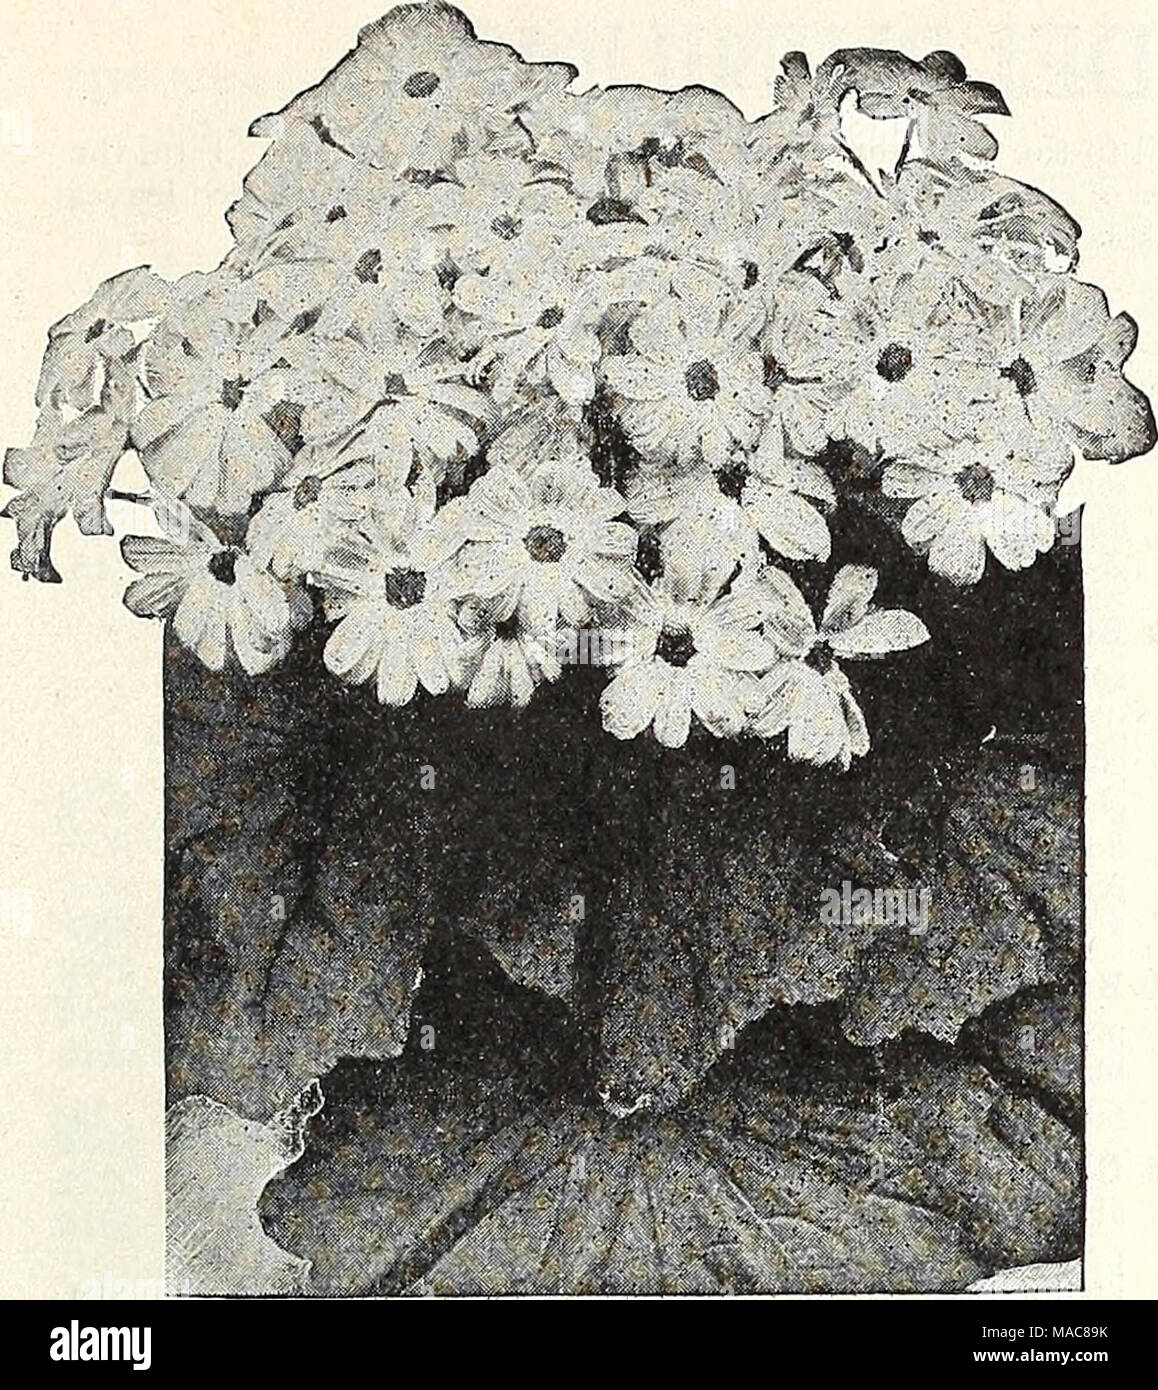 . Dreer's midsummer list 1931 . Dreer's Prize Dwarf Cineraria Cerastium (Snow in summer) 1911 Tomentosum. A very pretty dwarf, white-leaved edging plant, bearing small white flowers; hardy perennial. Splendid for rockery. J oz., 60 cts $0 15 Cheiranthus Very pretty dwarf hardy biennial plants, for early spring flowering sow in late summer. Splendid for rockery. 1915 Allionii {Siberian Wallflower). About 12 inches high with heads of brilliant orange flowers. | oz., 40 cts... 15 PER PKI. 1916 Linifolius {Alpine Wallflower). Forms compact plants about 9 inches high with numerous small spikes of b Stock Photo